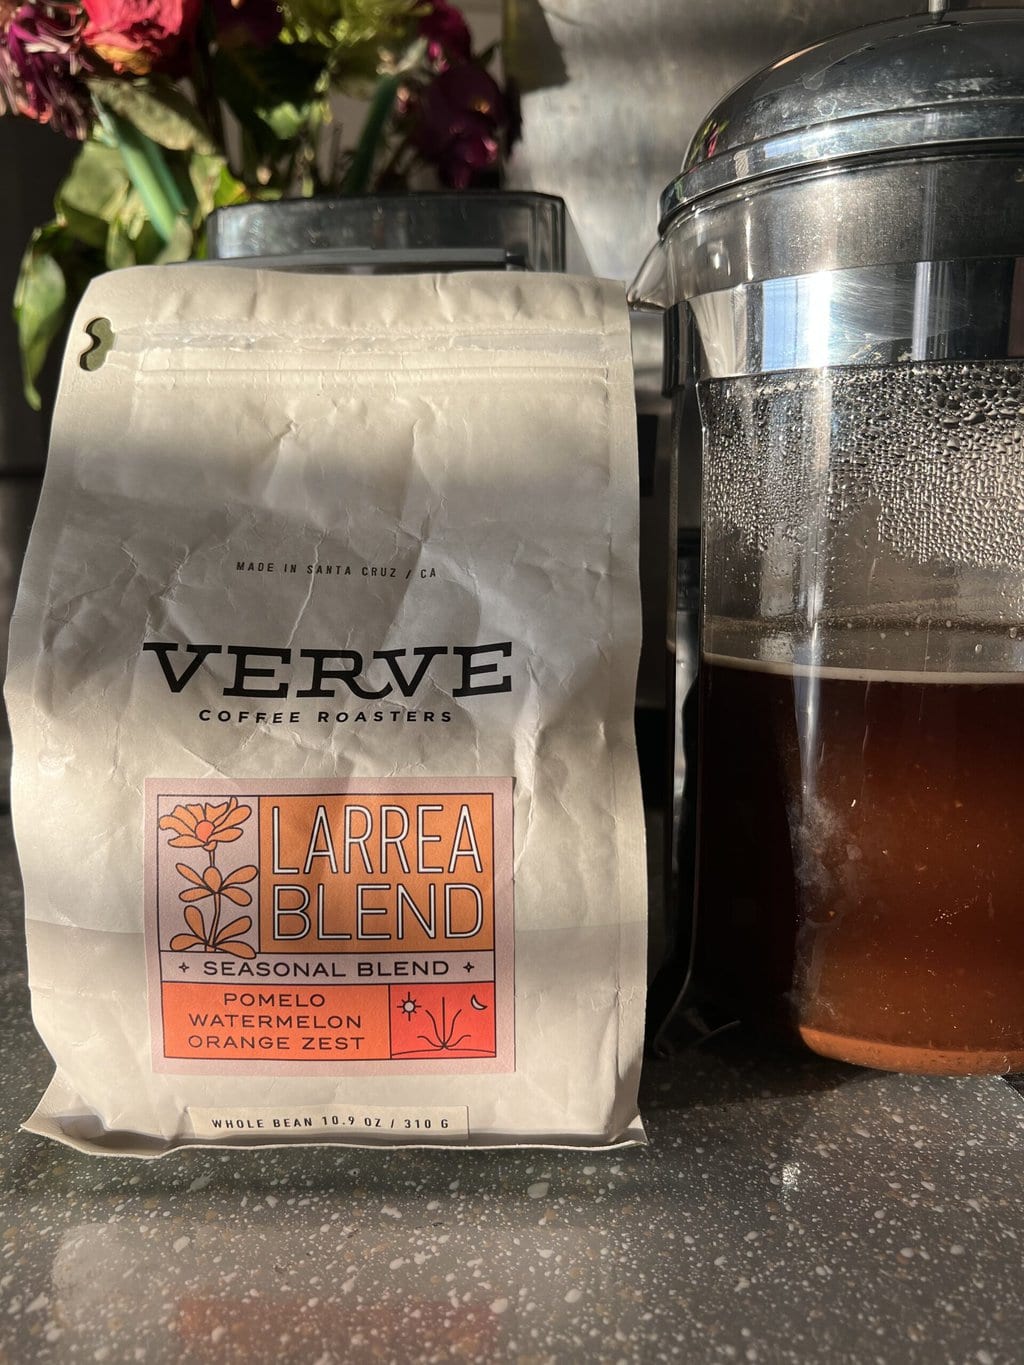 packaging Verve Coffee next to the French press in which coffee is brewed